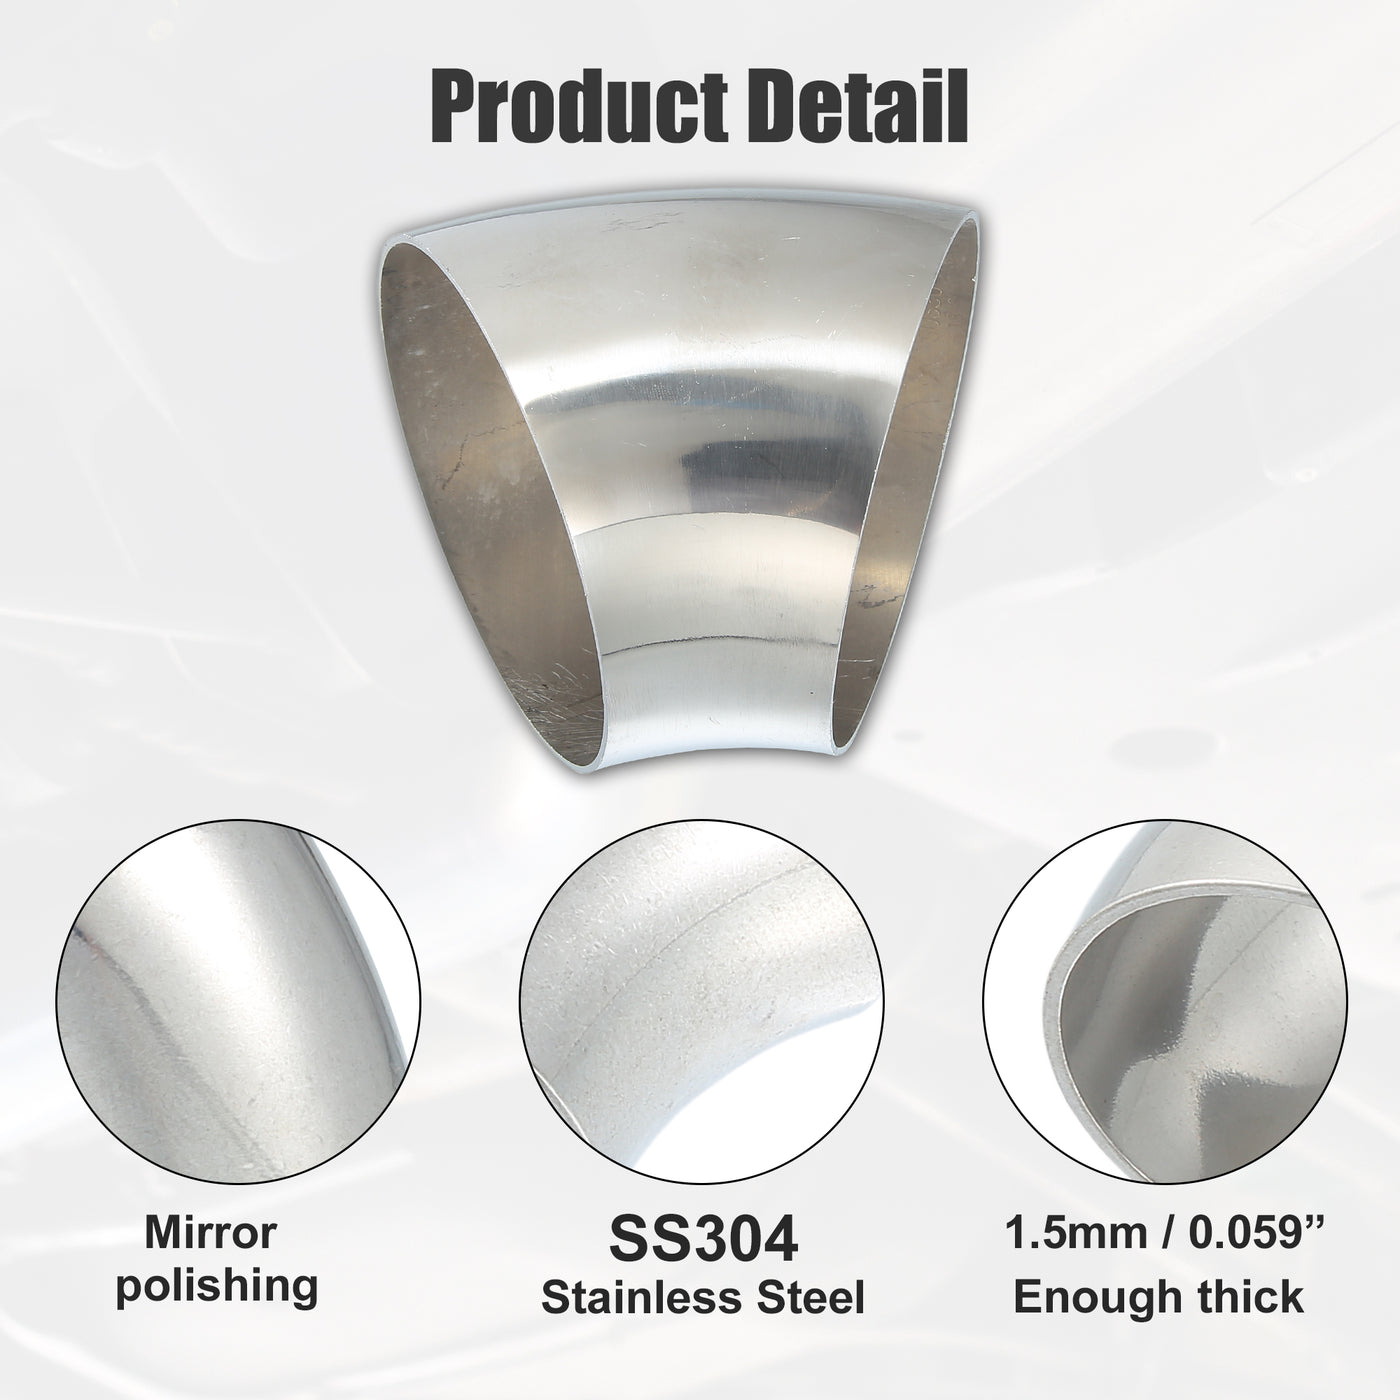 X AUTOHAUX OD 4" 45 Degree Mandrel Bend Exhaust Elbow Pipe SS304 Stainless Steel Bend Tube 16GA /.060" Wall Thickness Exhaust Piping for Car Exhaust Pipe Elbow Modified 1pcs